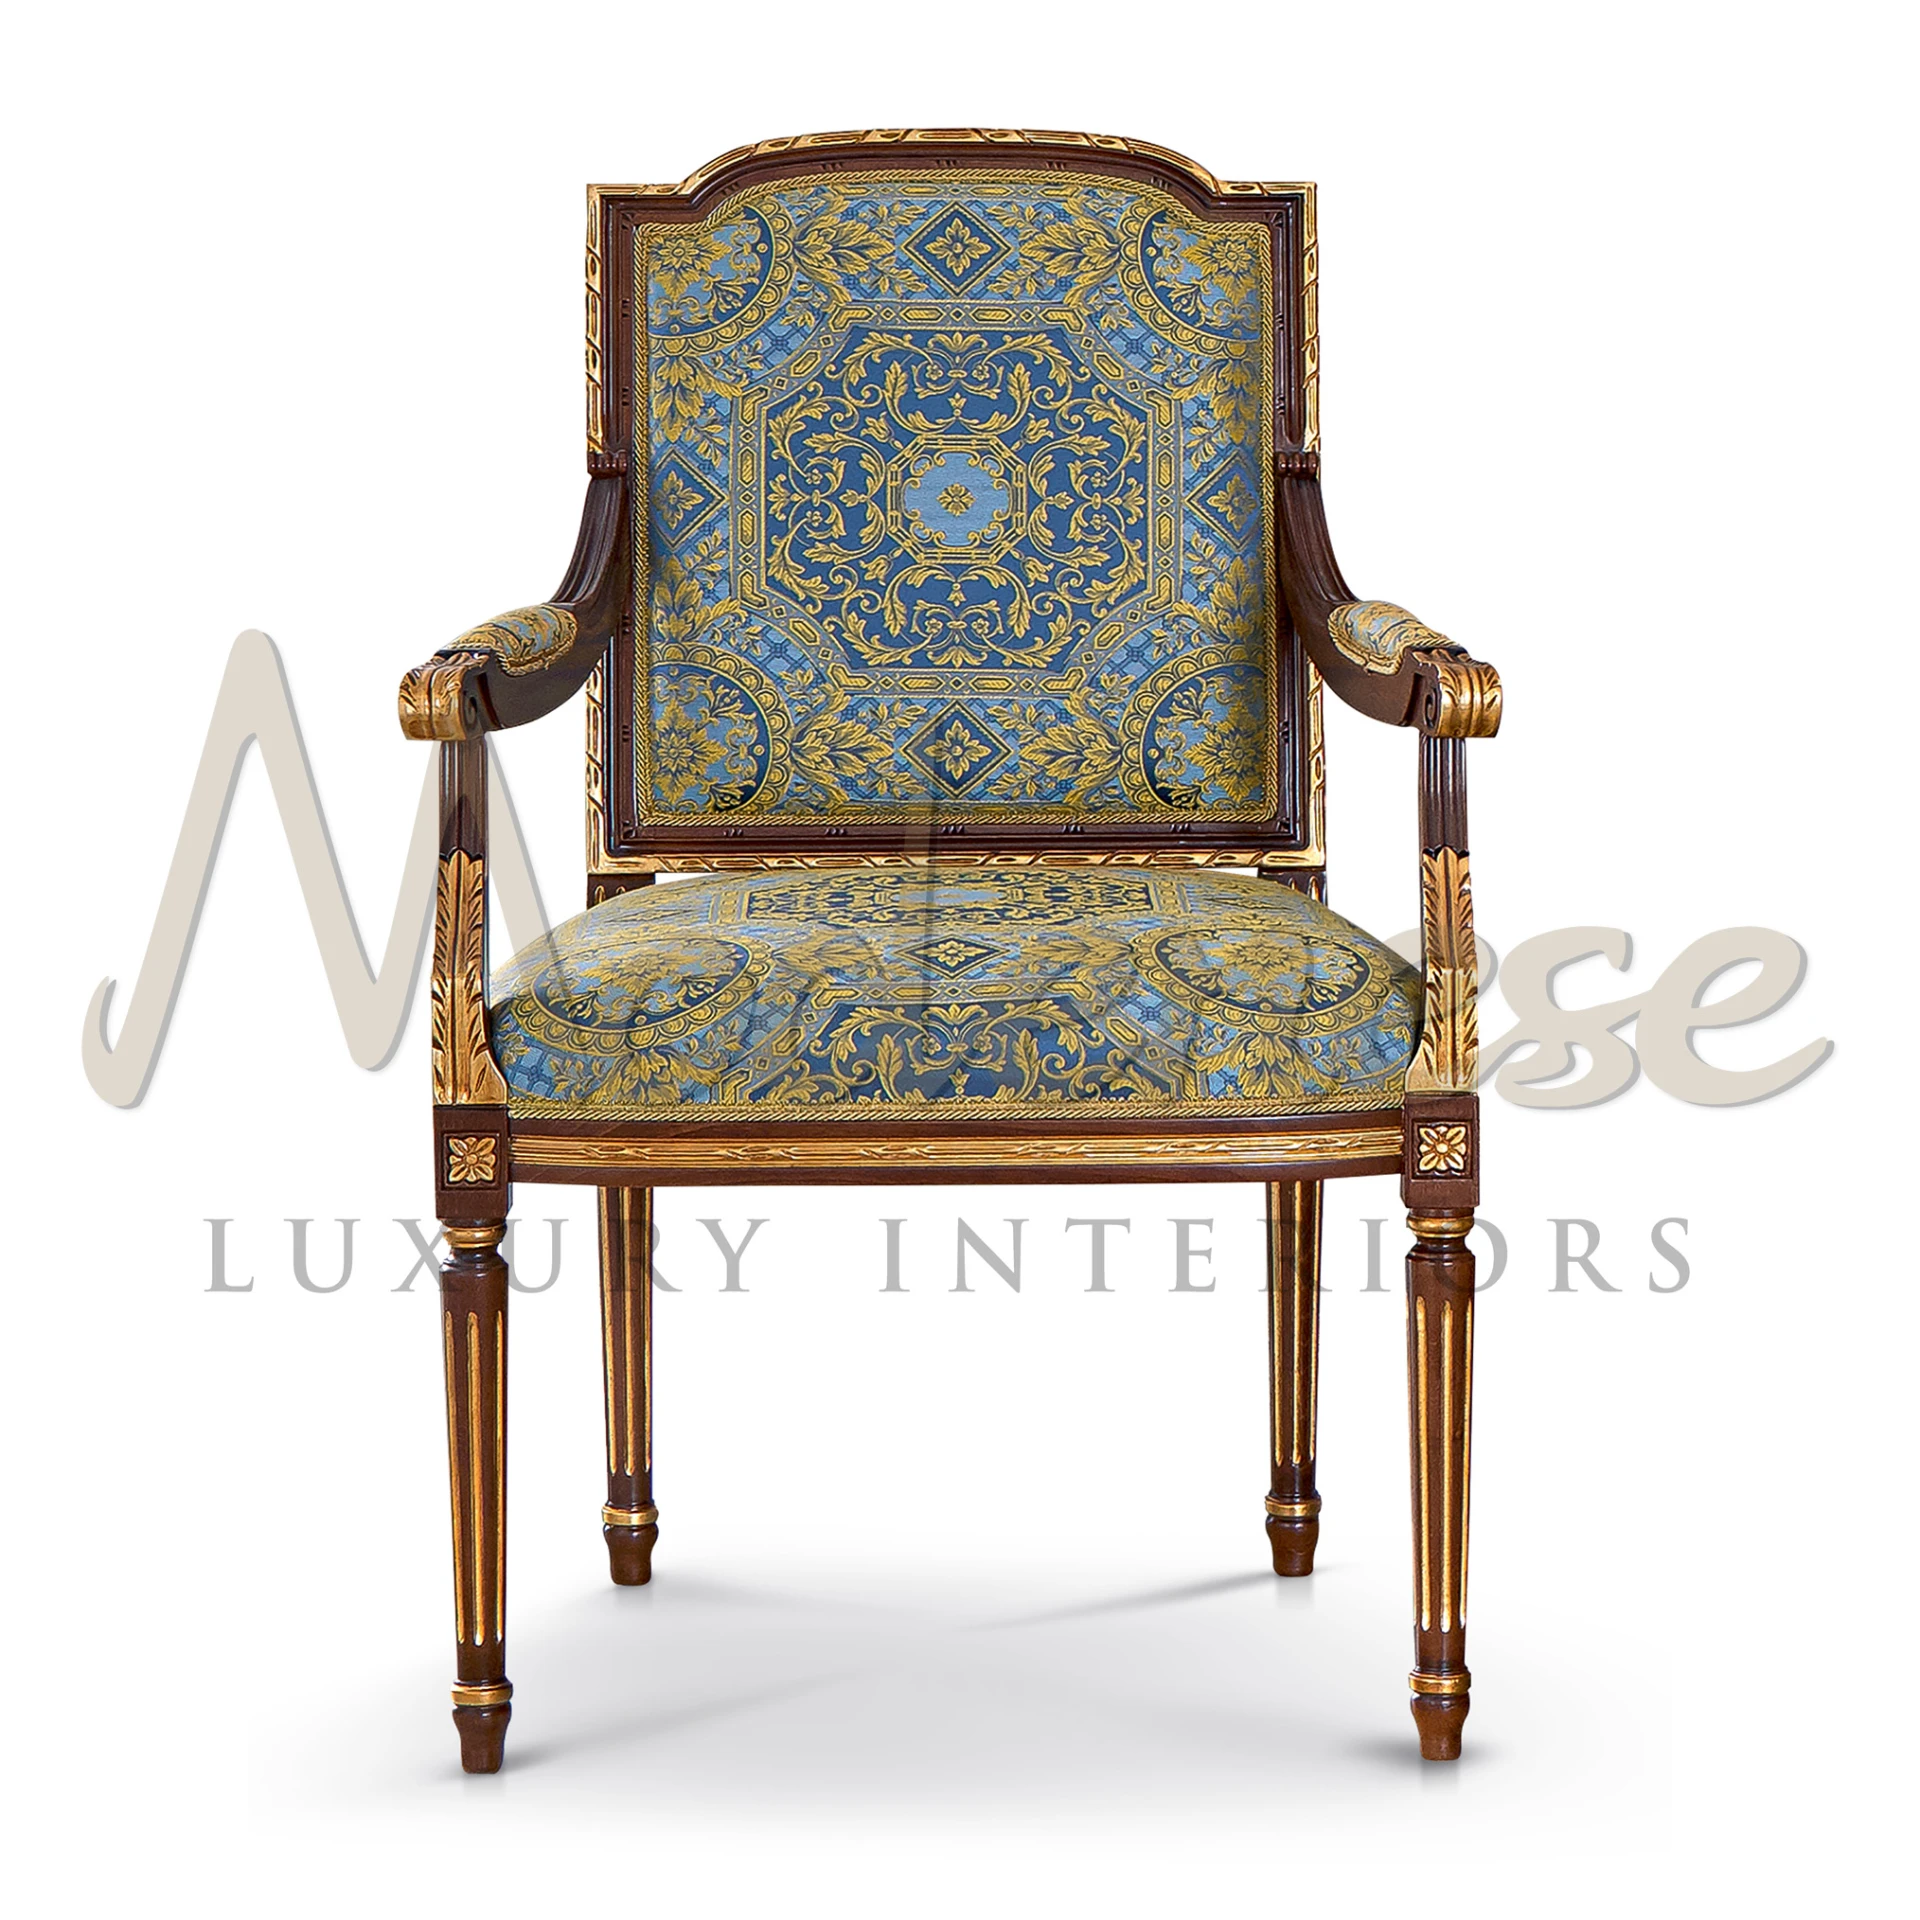 Luxurious baroque chair with natural walnut wood and gold leaf tone.